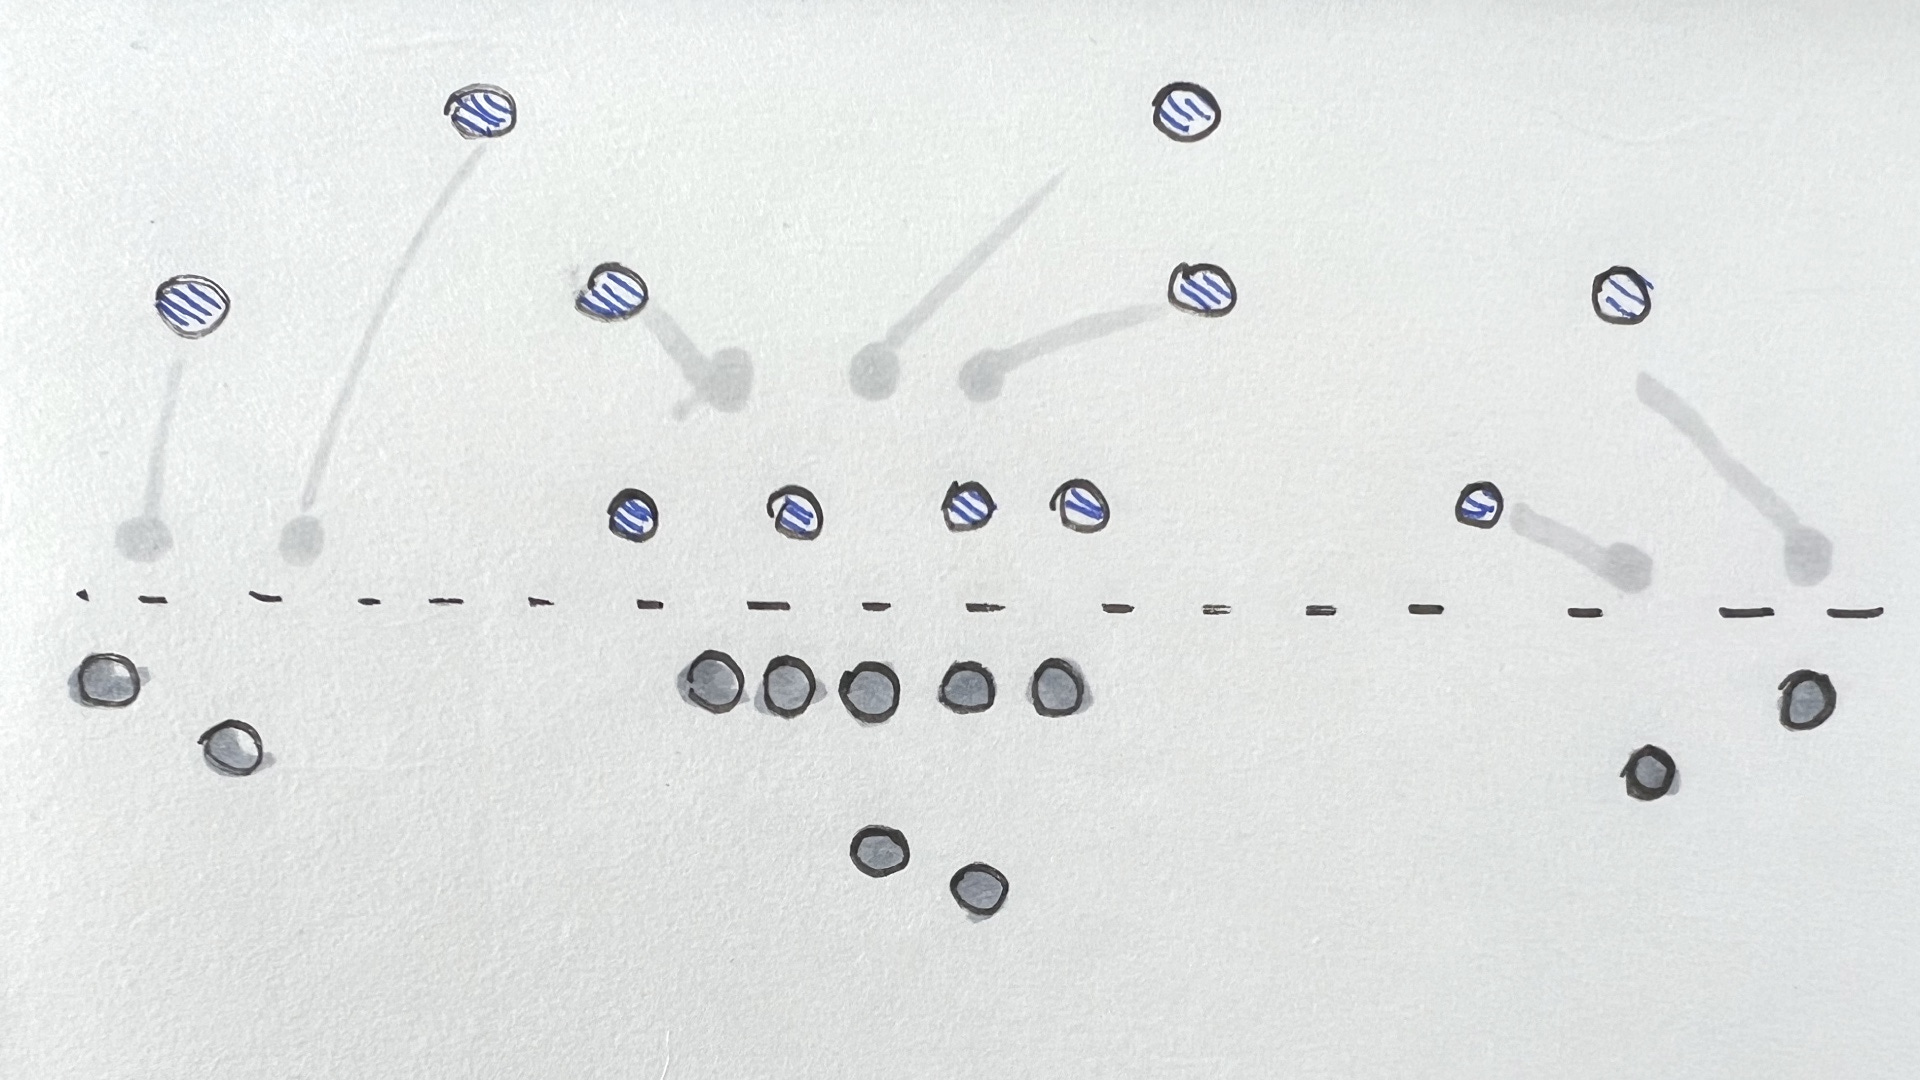 Drawing of circles representing football players in a Prevent Defense Scheme